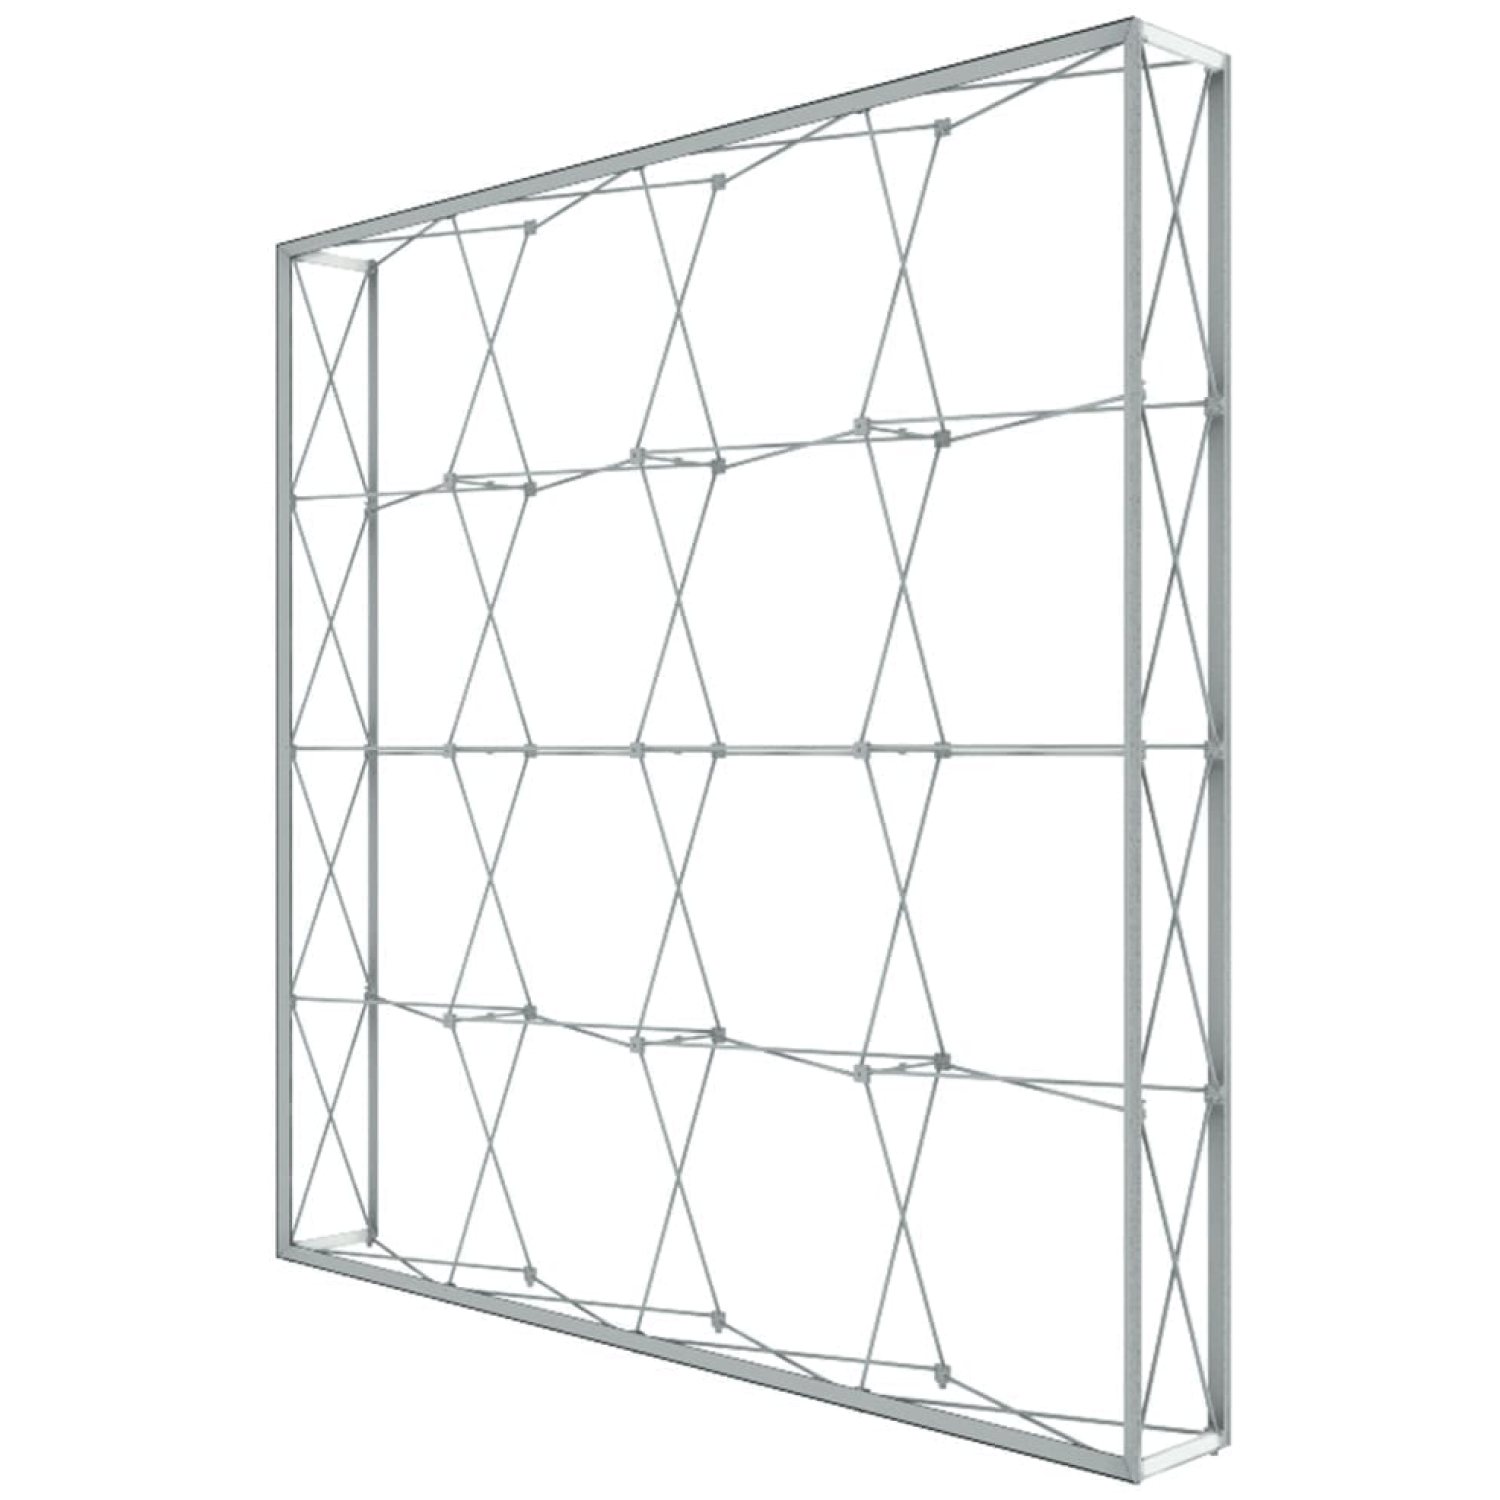 Lumiere Light Wall 10 Ft. X 10 Ft. No Lights (frame Only) Includes: 1 10’x10′ Pop Up Frame.